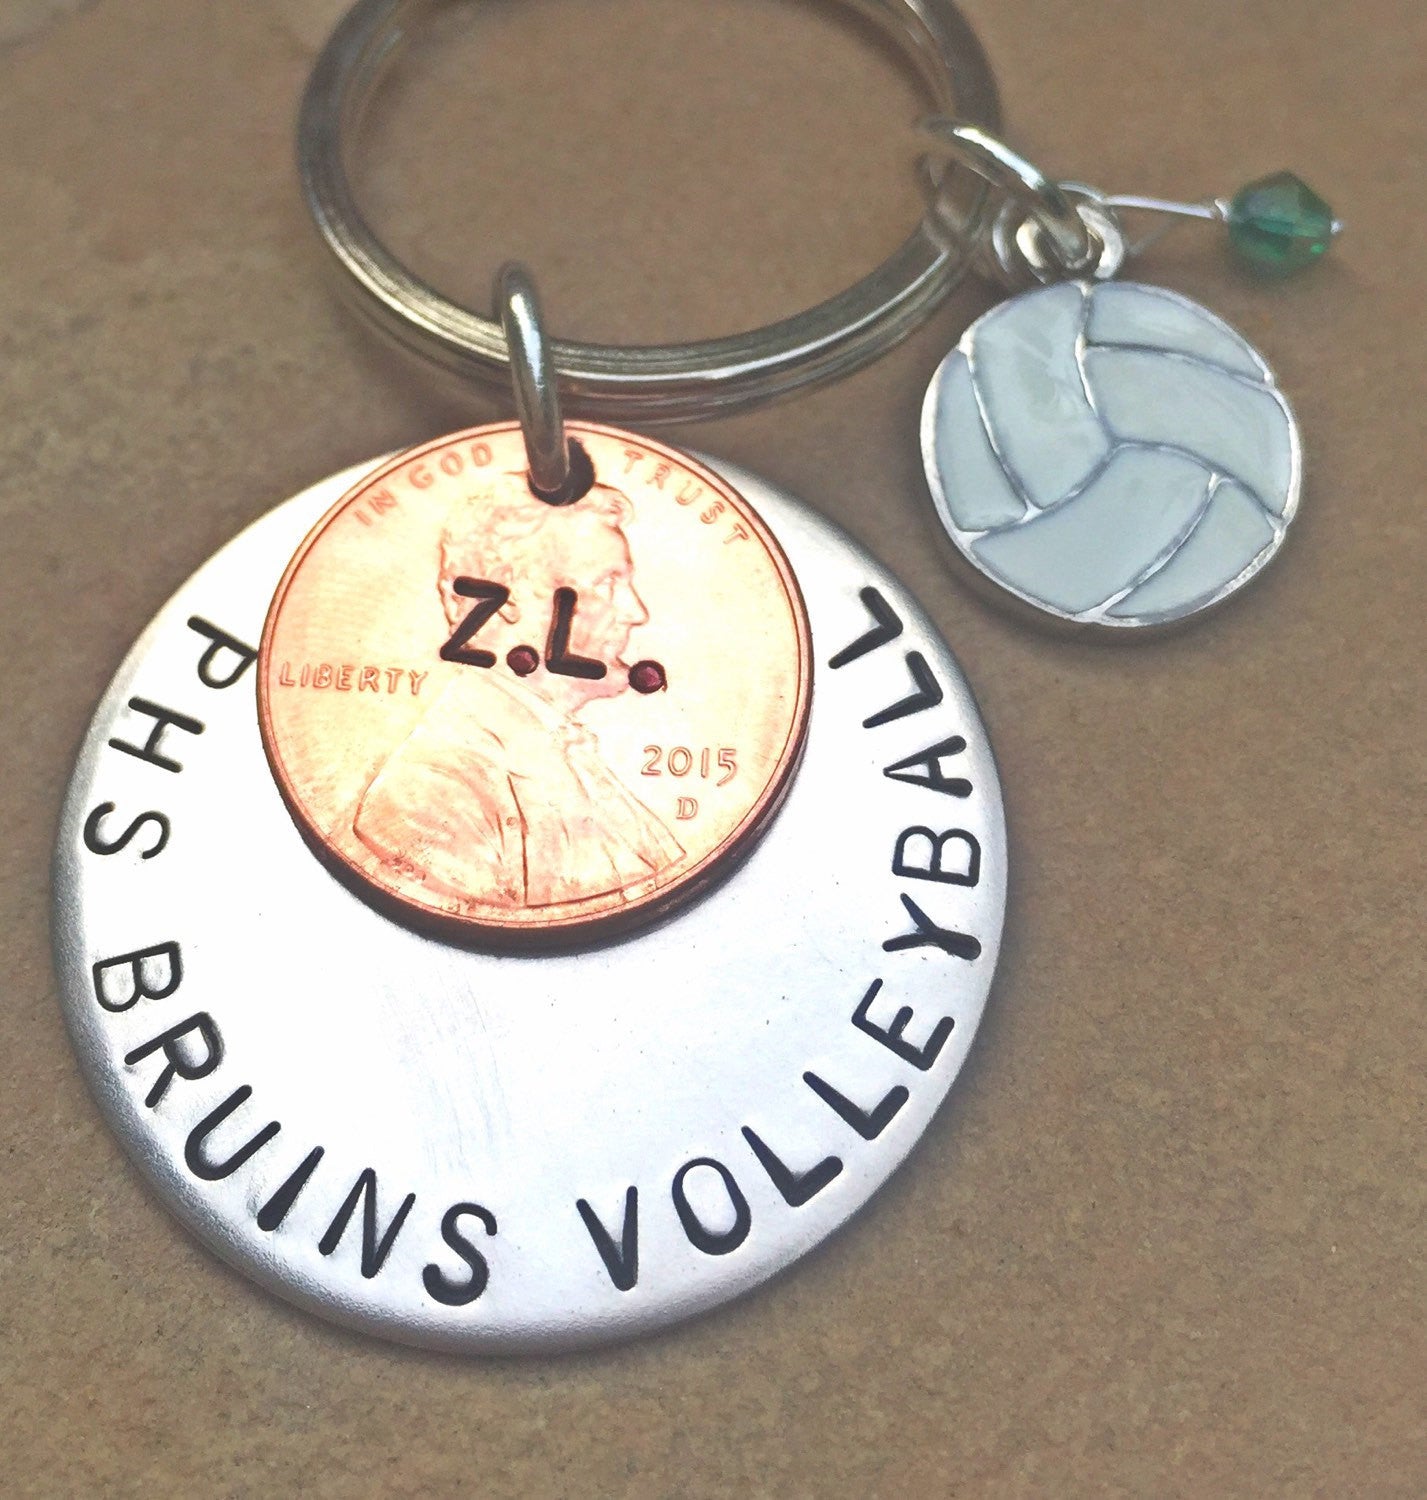 Soccer Gift, Christmas Gift, High School Sports Keychain, Volleyball Keychain, Personalized High School Sport Keychain, Football - Natashaaloha, jewelry, bracelets, necklace, keychains, fishing lures, gifts for men, charms, personalized, 